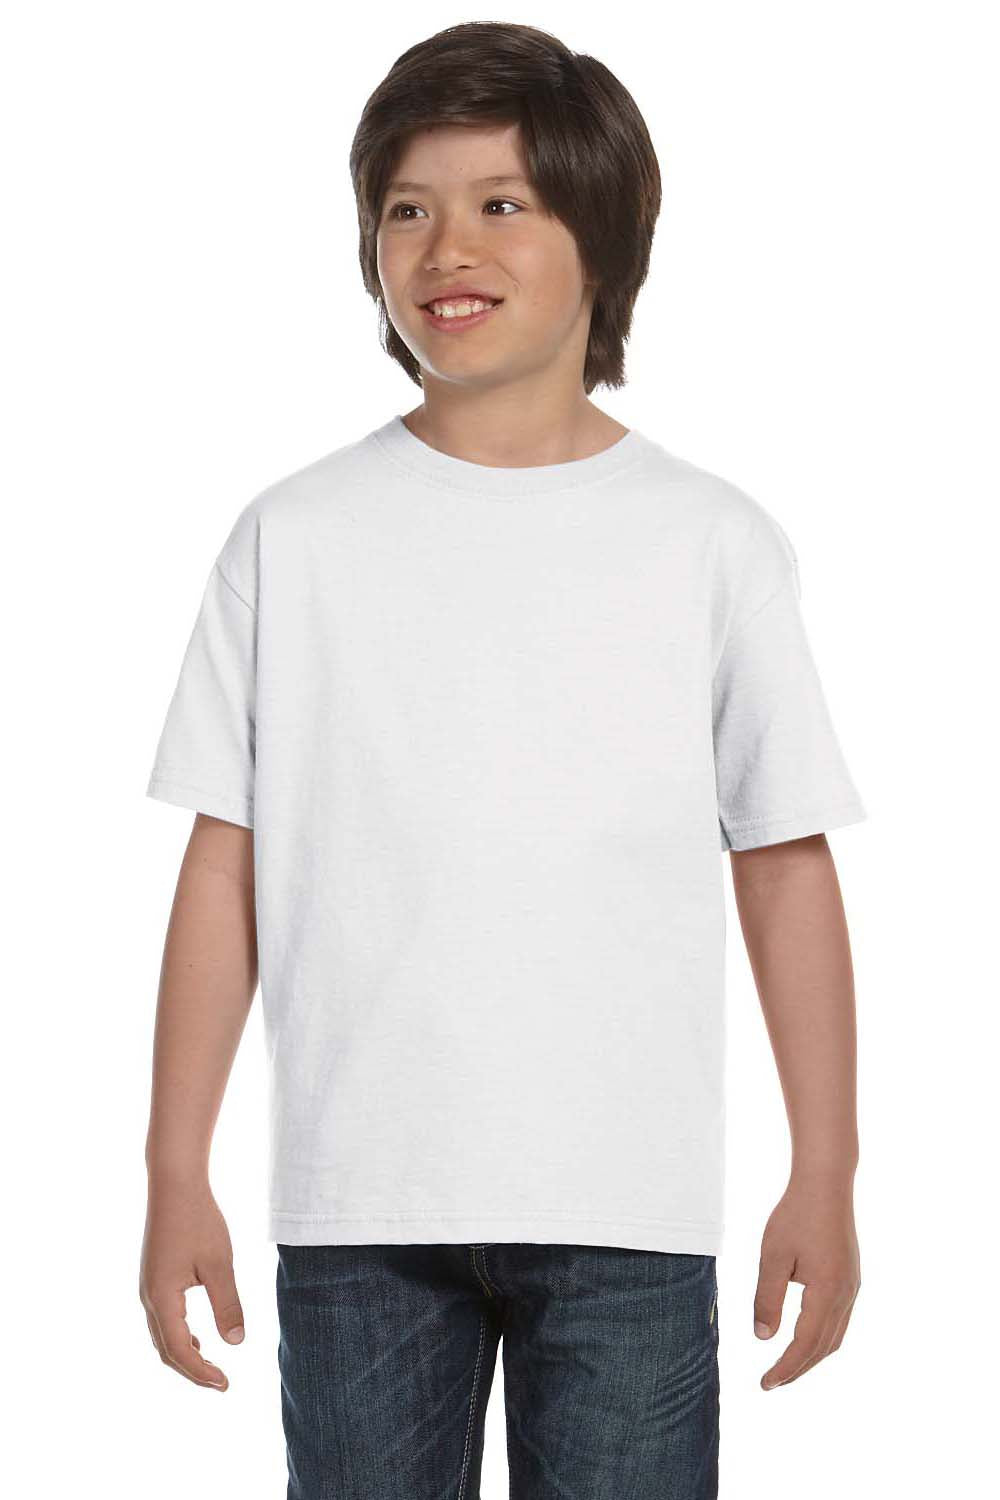 Hanes 5380 Youth Beefy-T Short Sleeve Crewneck T-Shirt White Front